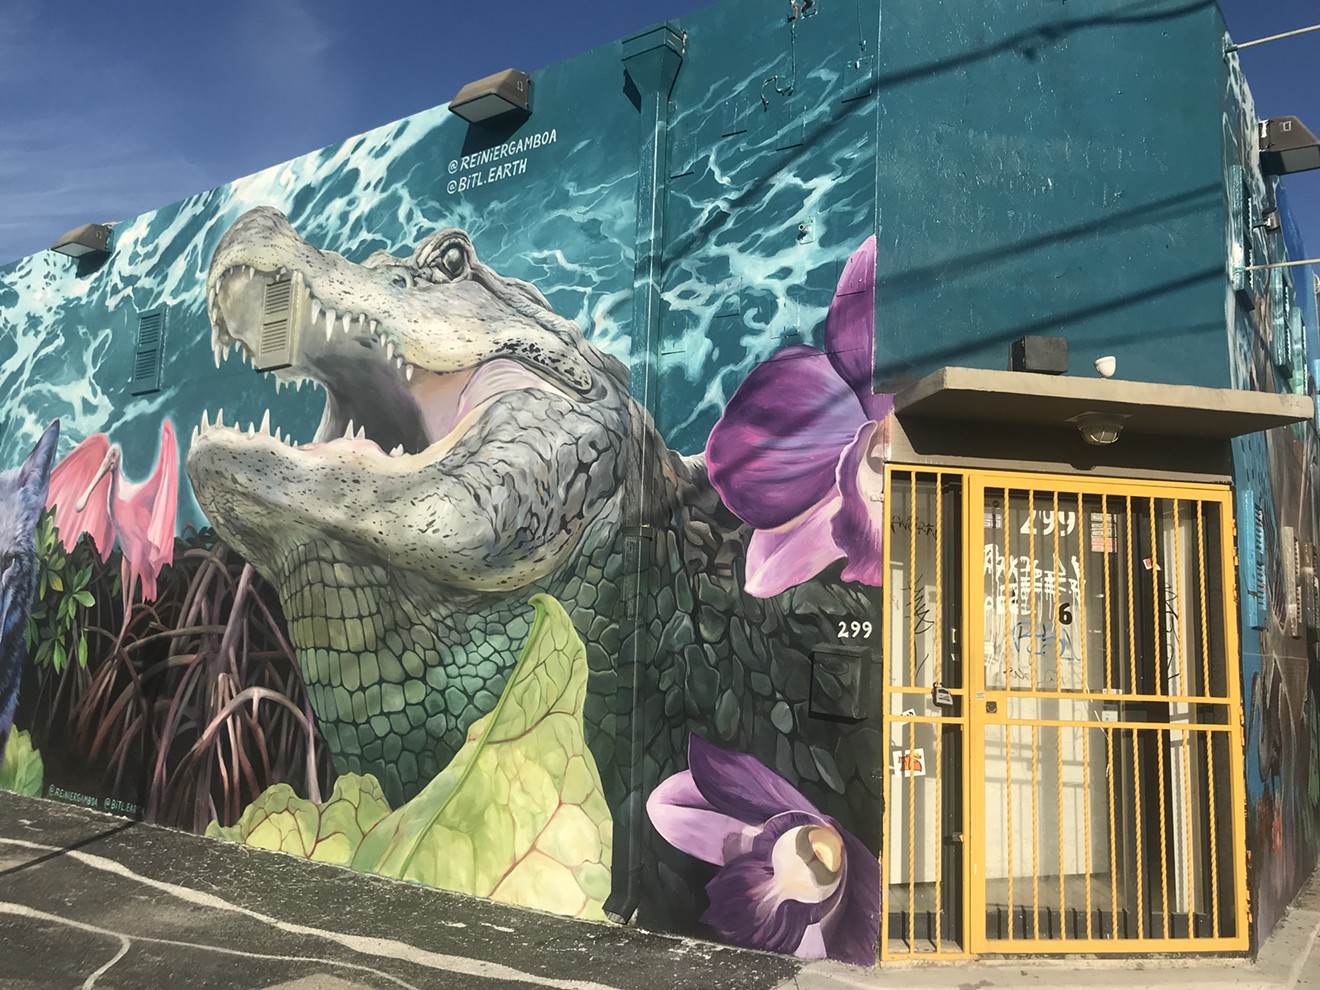 Latest augmented reality mural by Before It's Too Late and Reinier Gamboa.